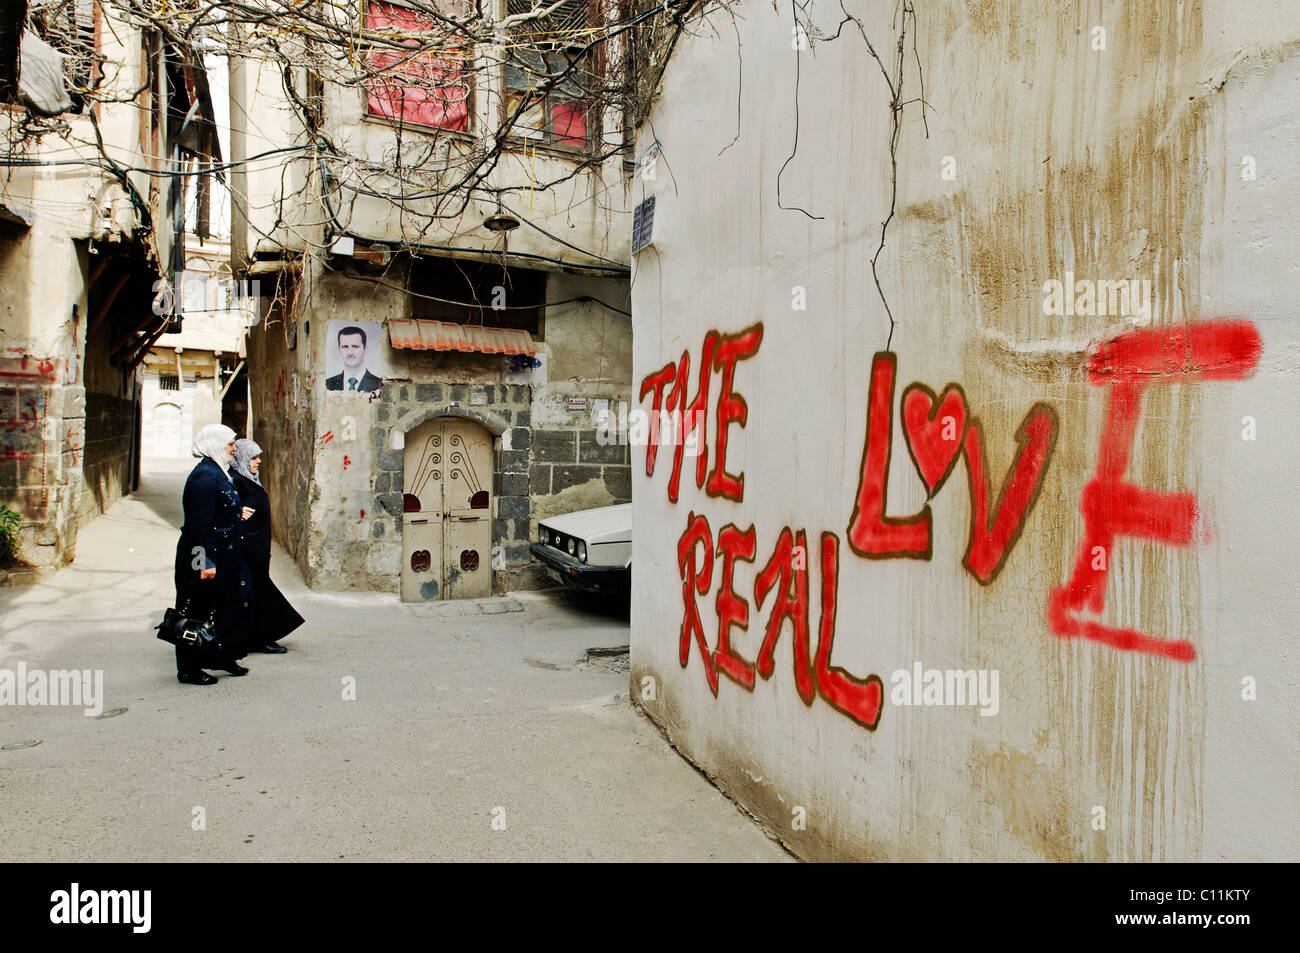 Women with headscarves and graffiti, "Real Love", in the historic centre of Damascus, photo of Bashar Al Assad in the back Stock Photo